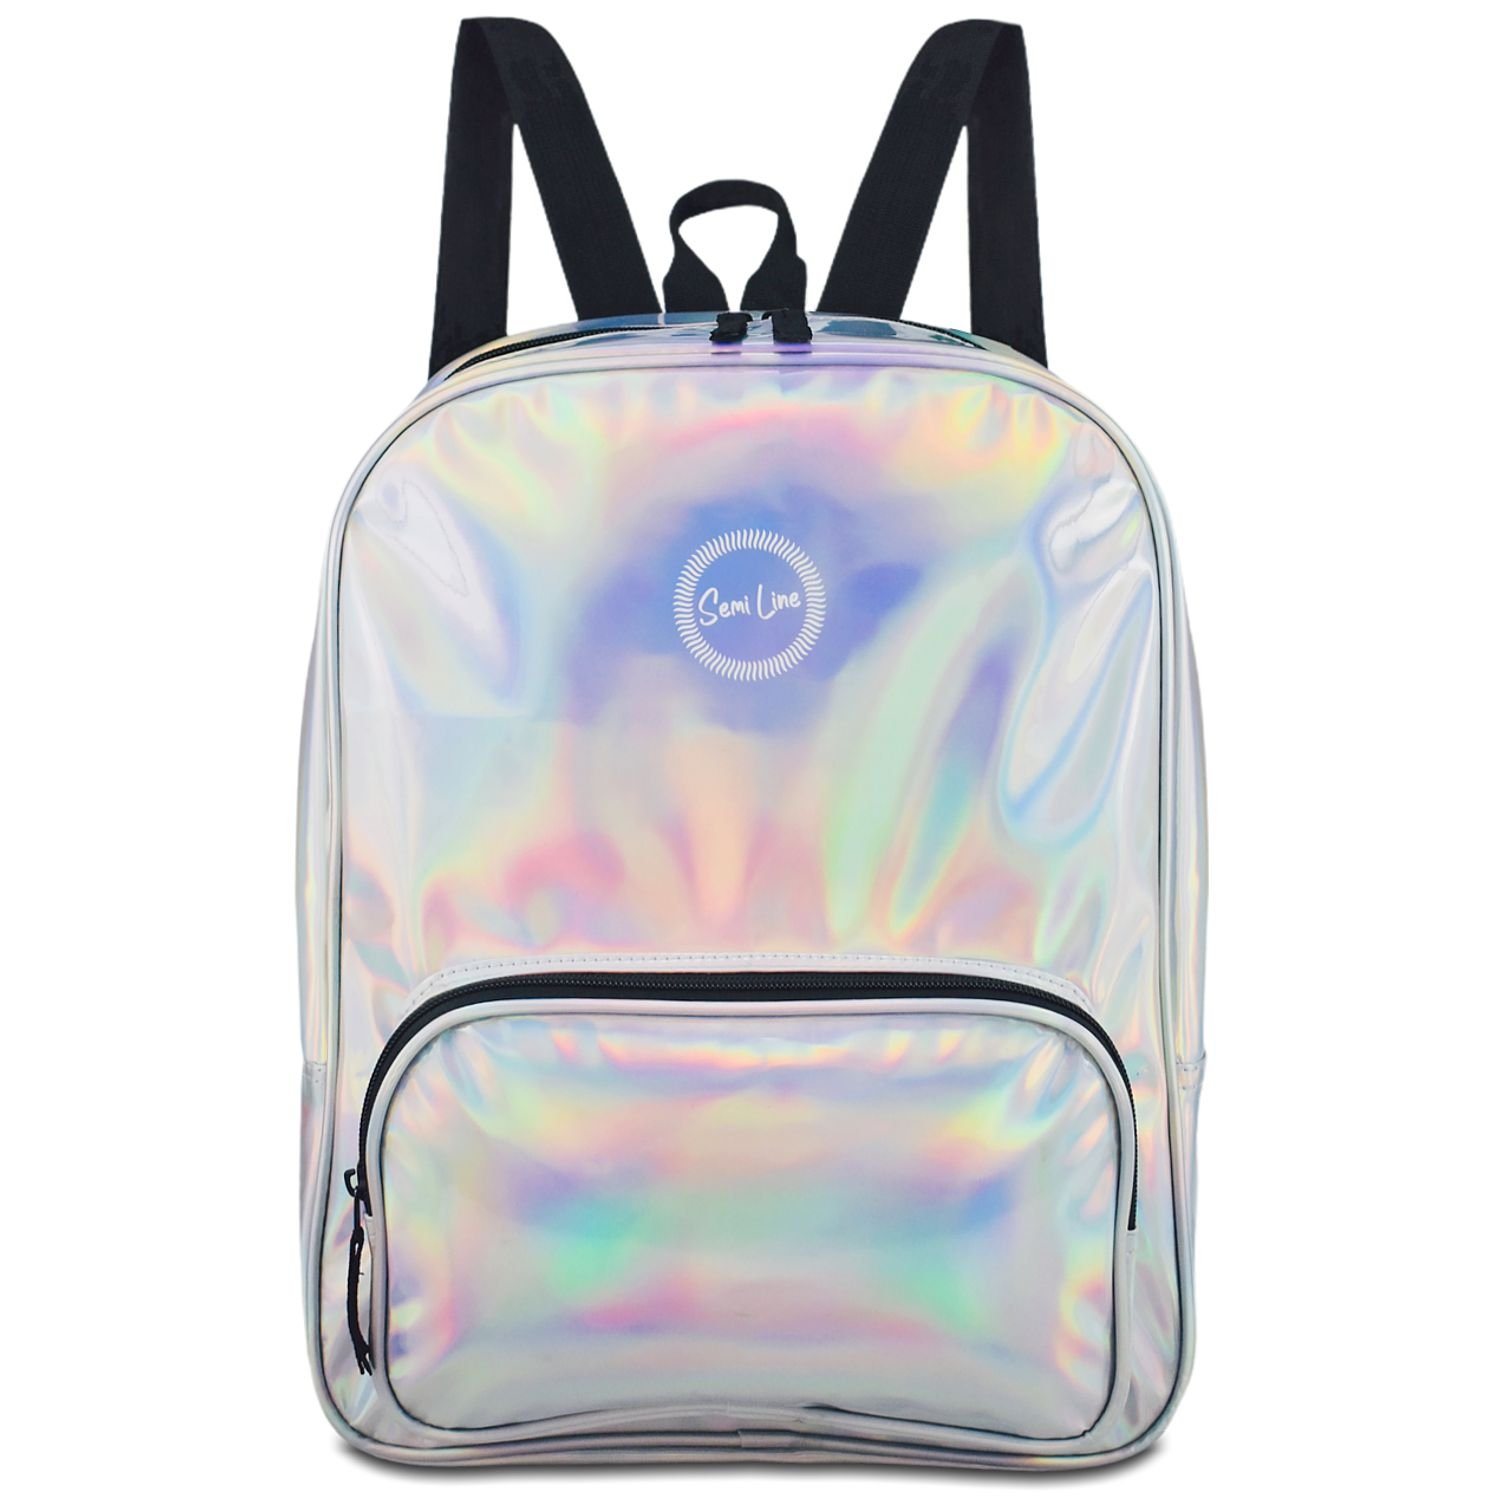 Semiline Woman's Youth Backpack